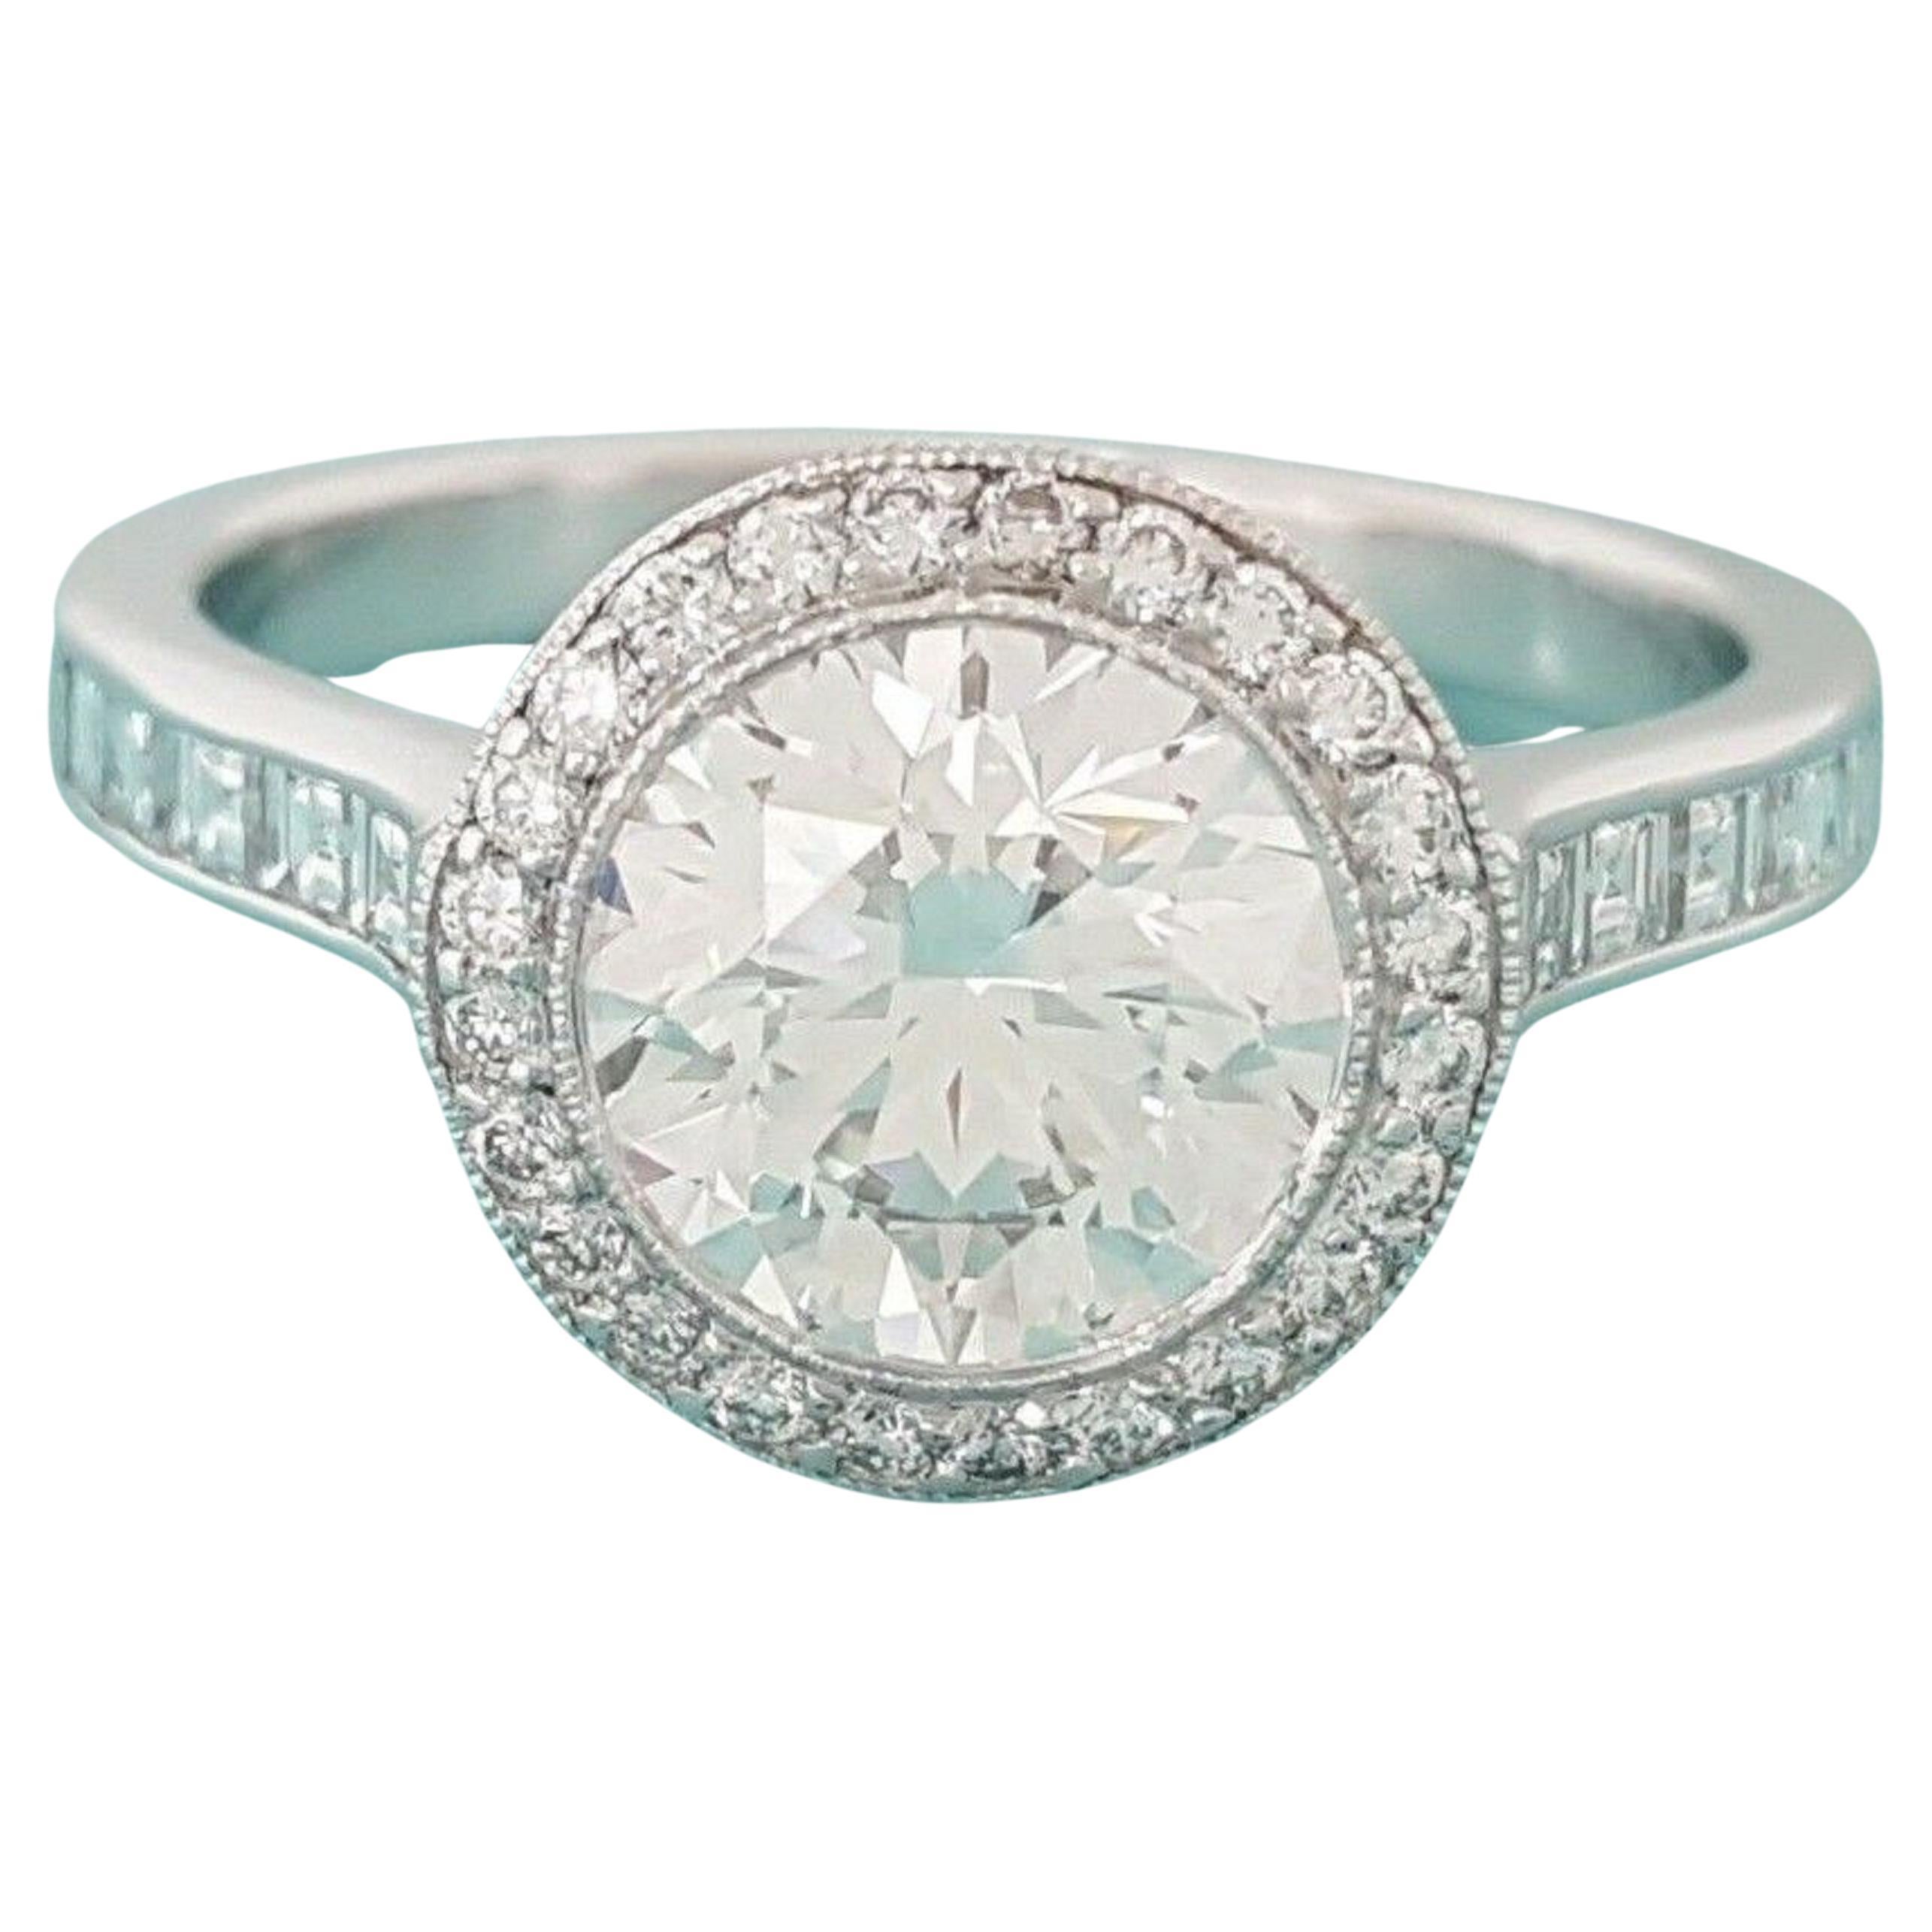 Tiffany & Co. Embrace 2 Carat Total Weight Platinum Ideal Ring